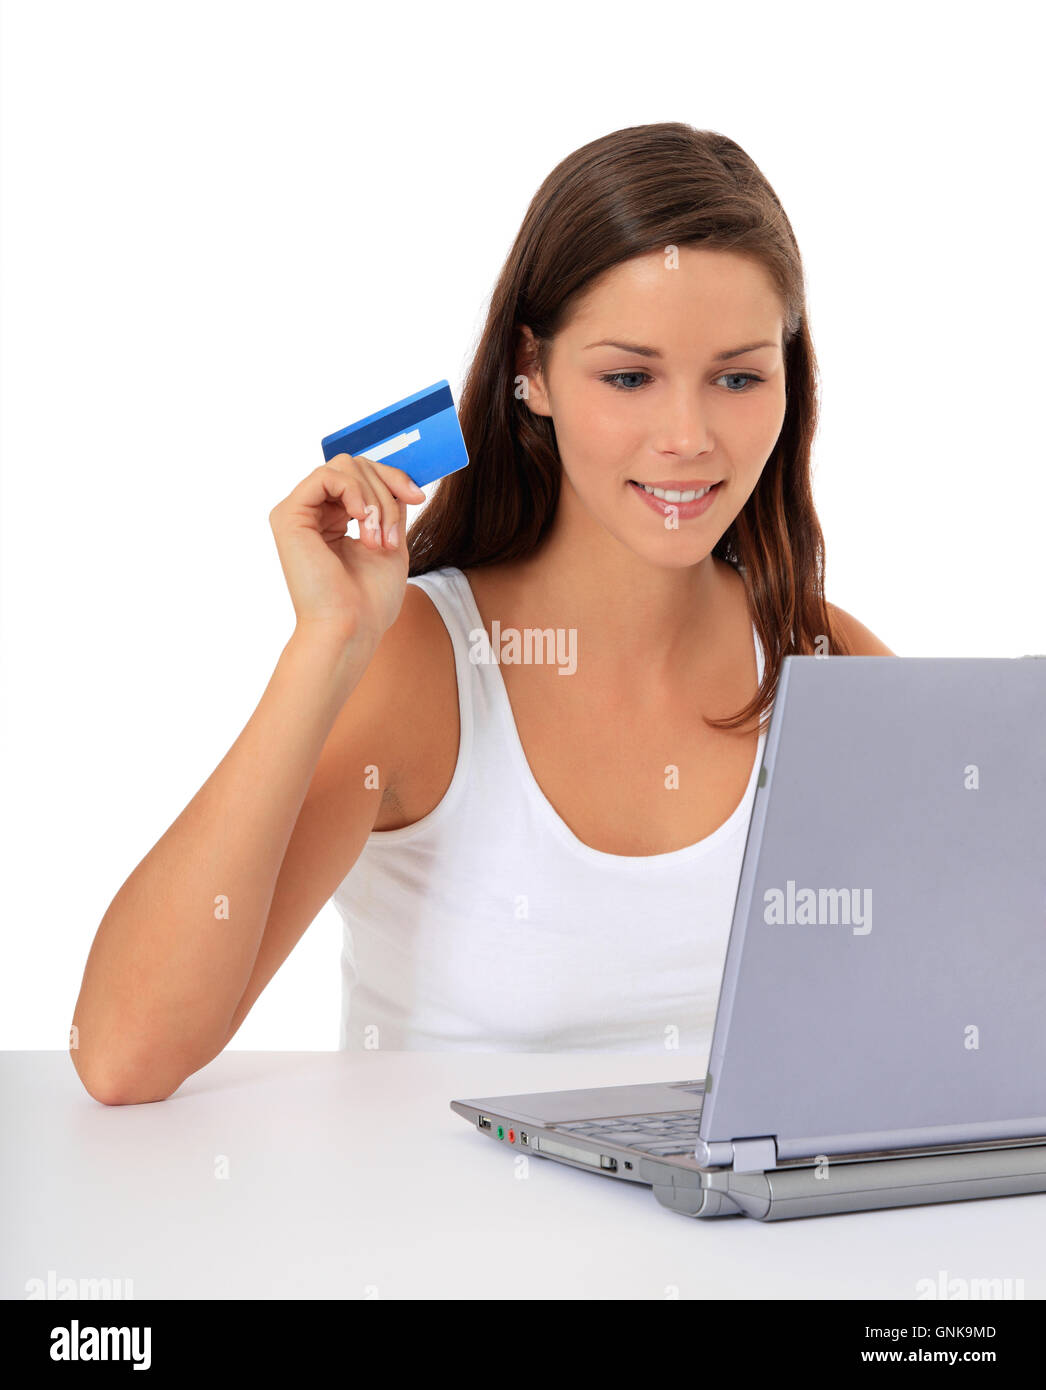 woman ordering things on the internet Stock Photo